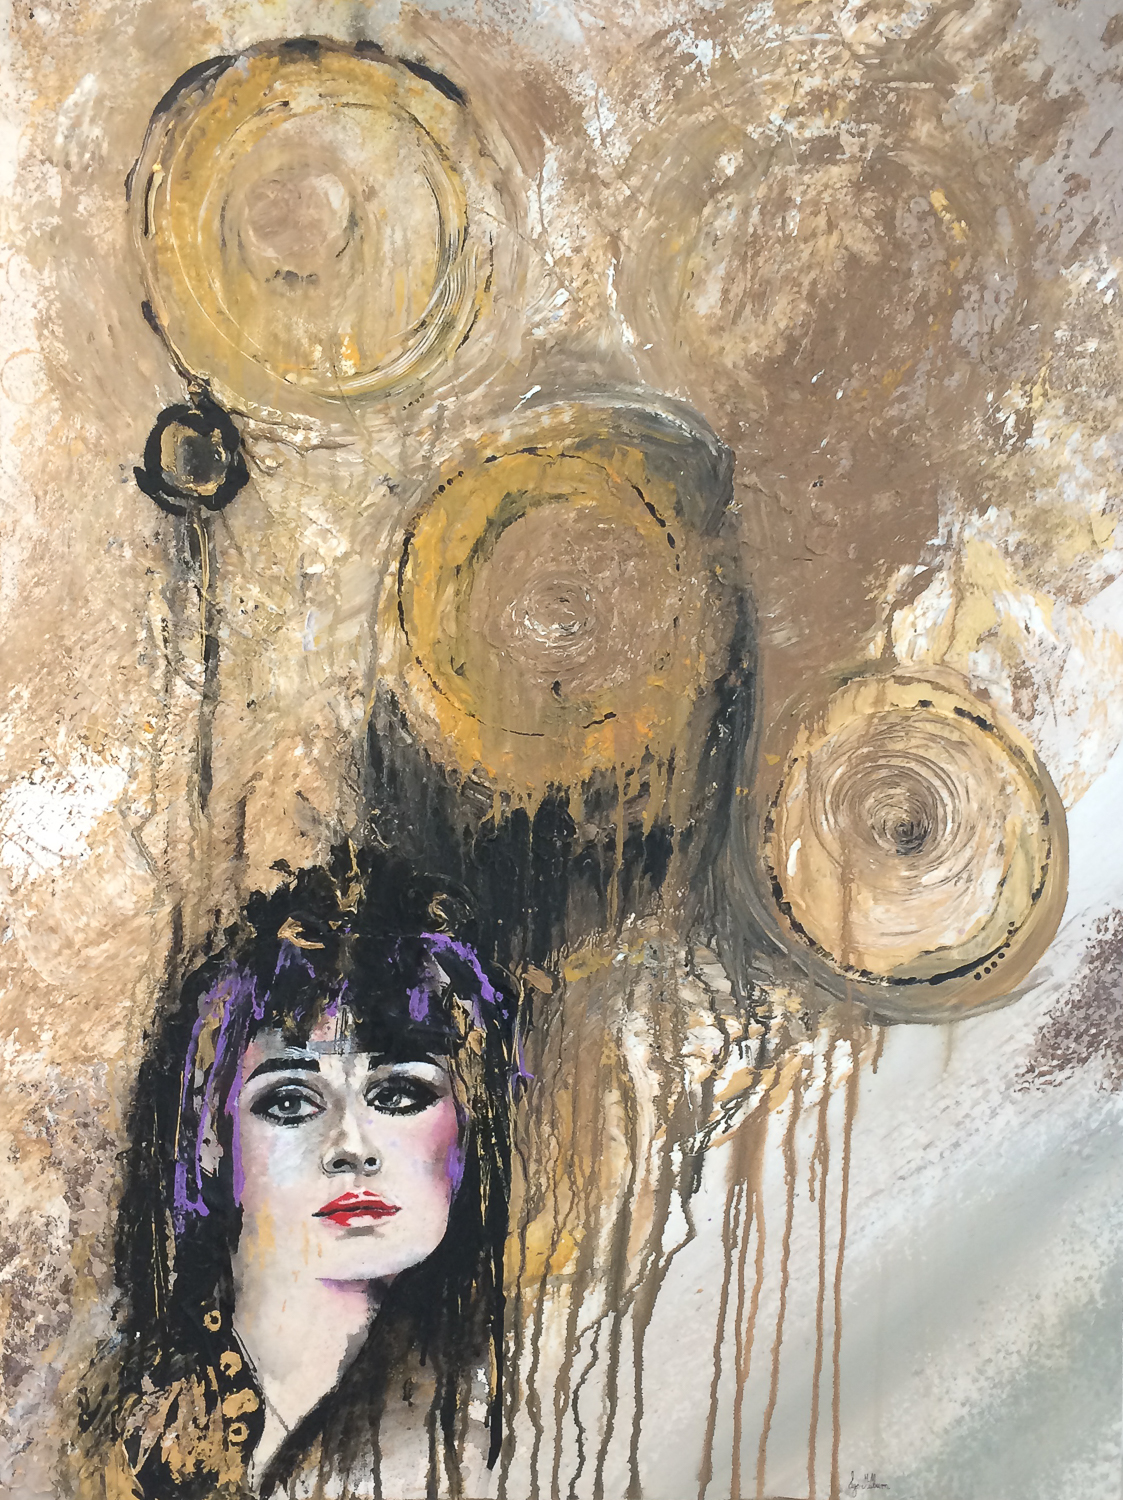 Painting of a woman with abstract balloons above her